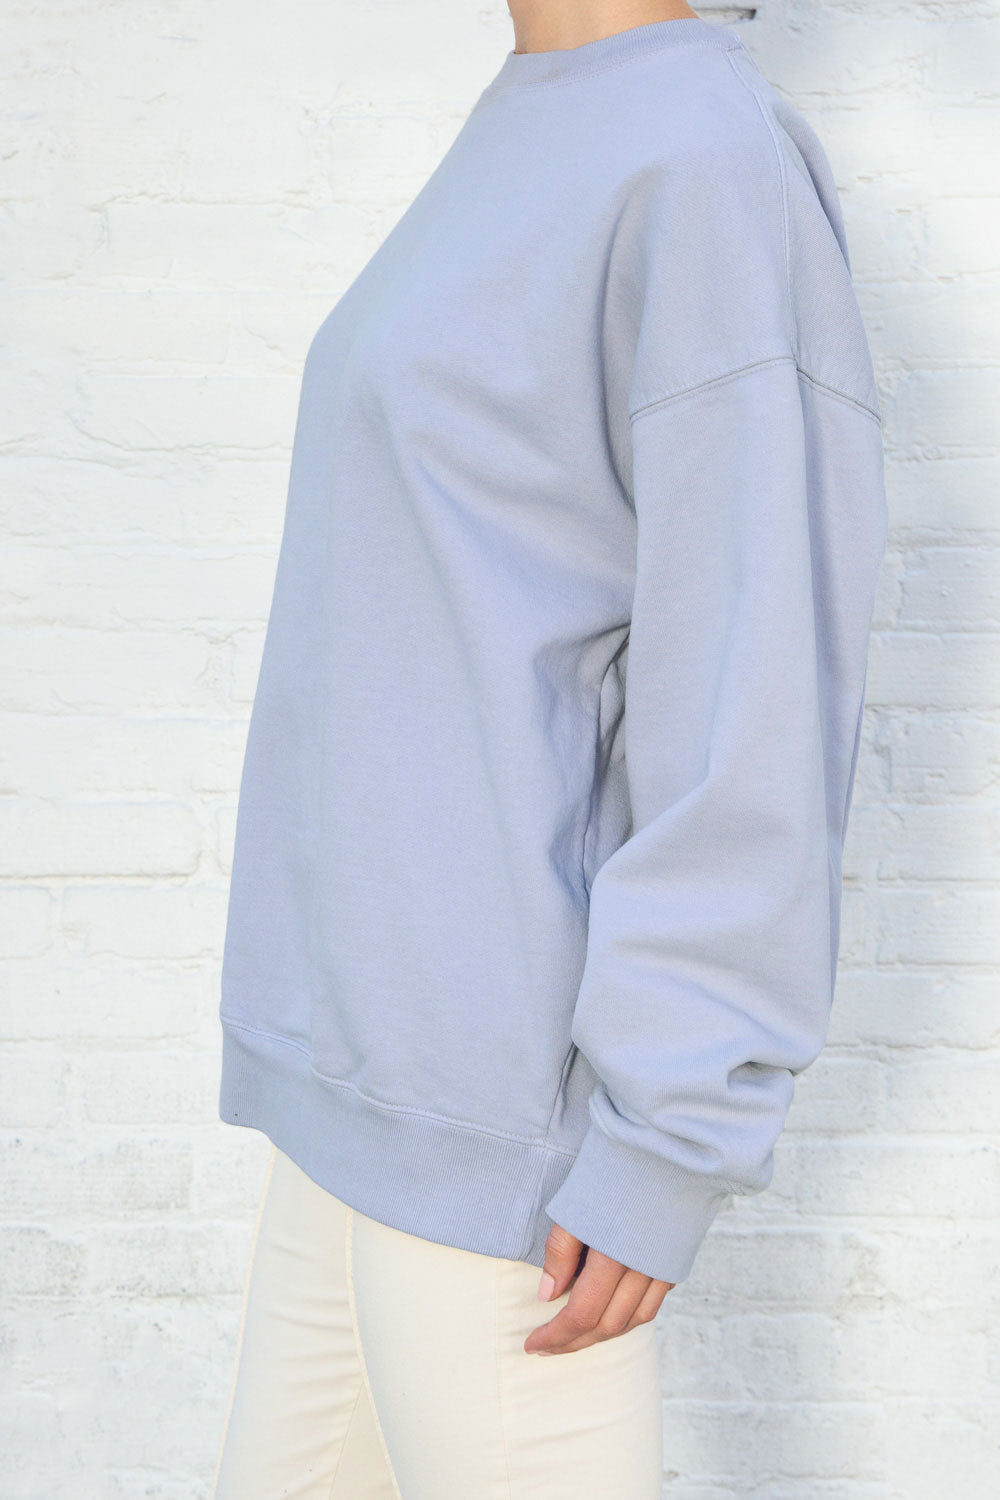 Periwinkle / Oversized Fit